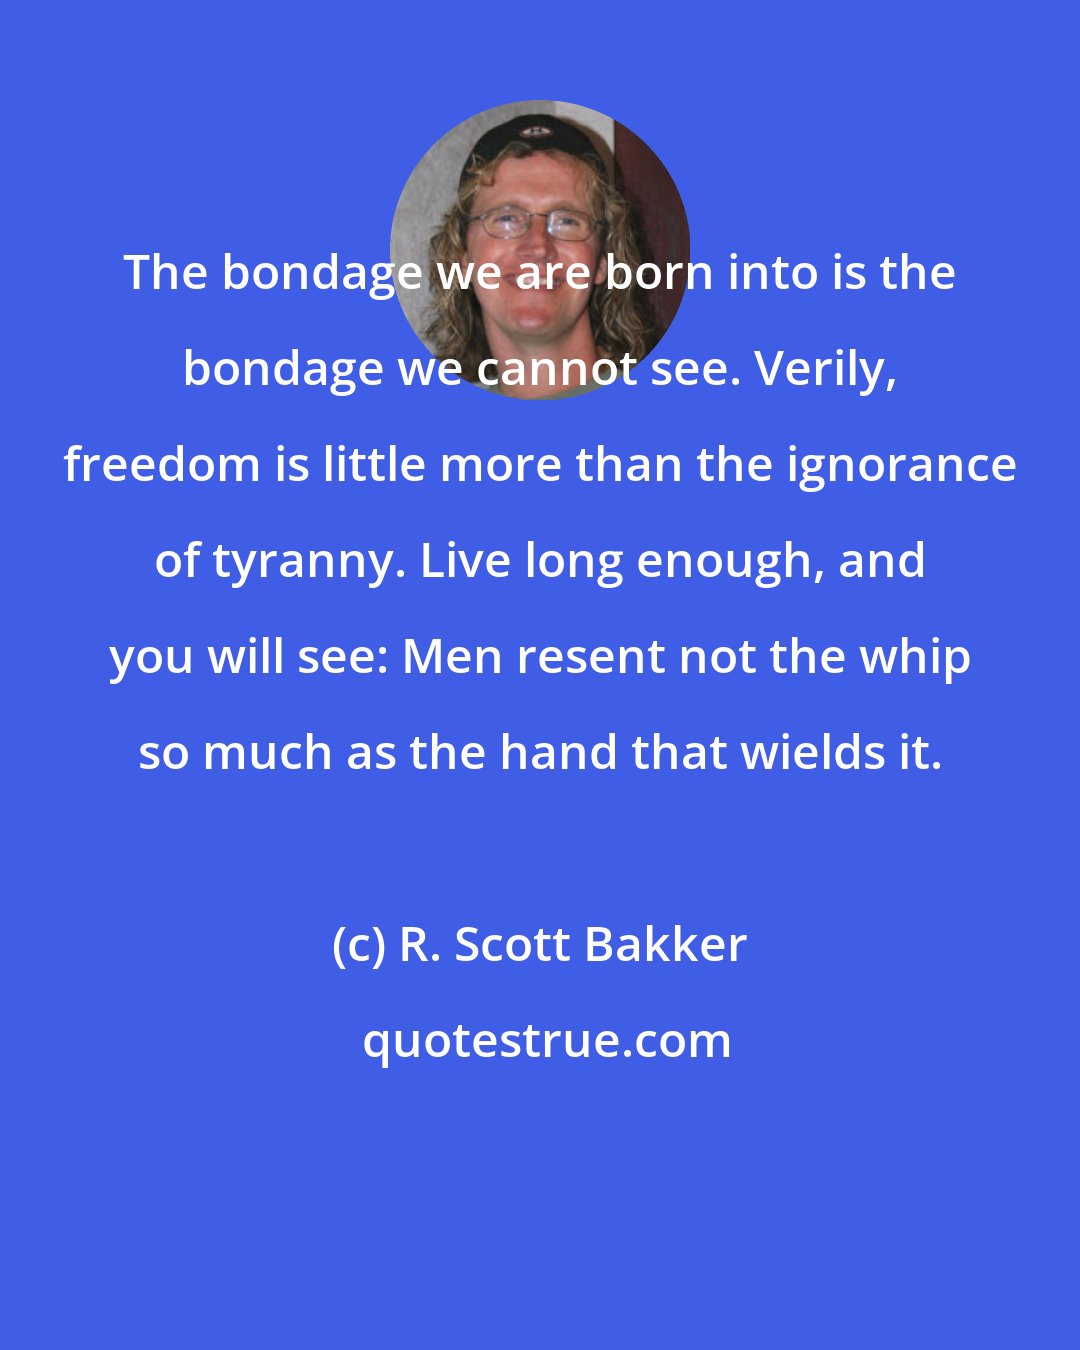 R. Scott Bakker: The bondage we are born into is the bondage we cannot see. Verily, freedom is little more than the ignorance of tyranny. Live long enough, and you will see: Men resent not the whip so much as the hand that wields it.